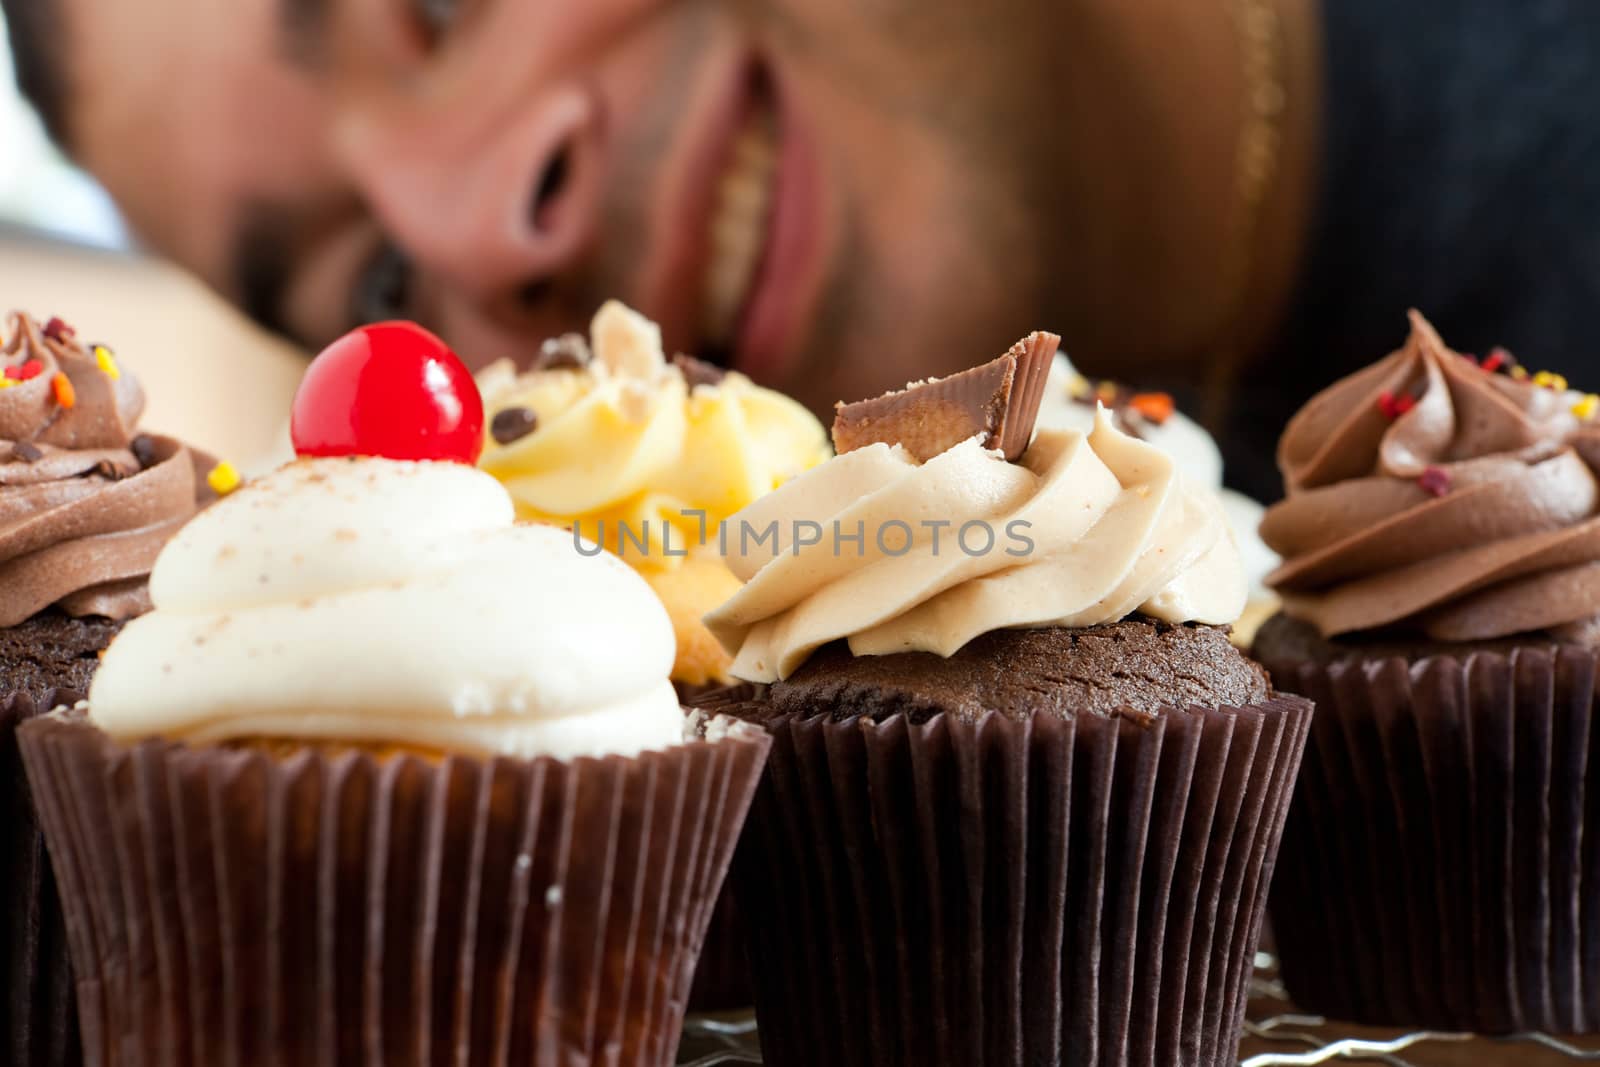 Close up of some decadent gourmet cupcakes frosted with a variety of frosting flavors.  Shallow depth of field with the face of a smiling man in the background.